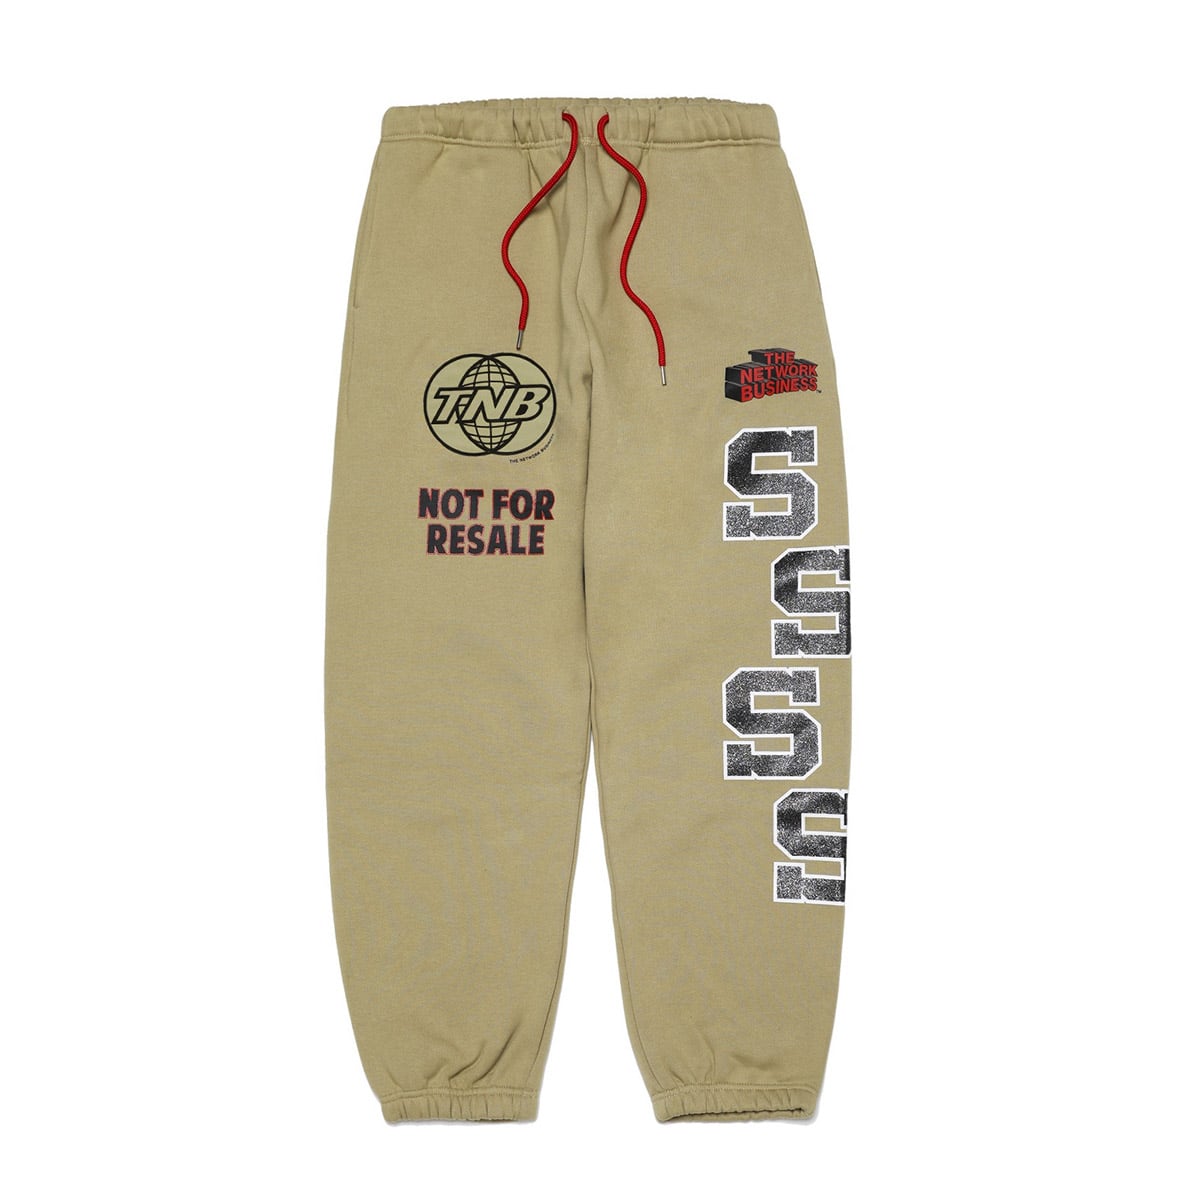 THE NETWORK BUSINESS Sweat Pants Taupe Haze BEIGE 21SP-I